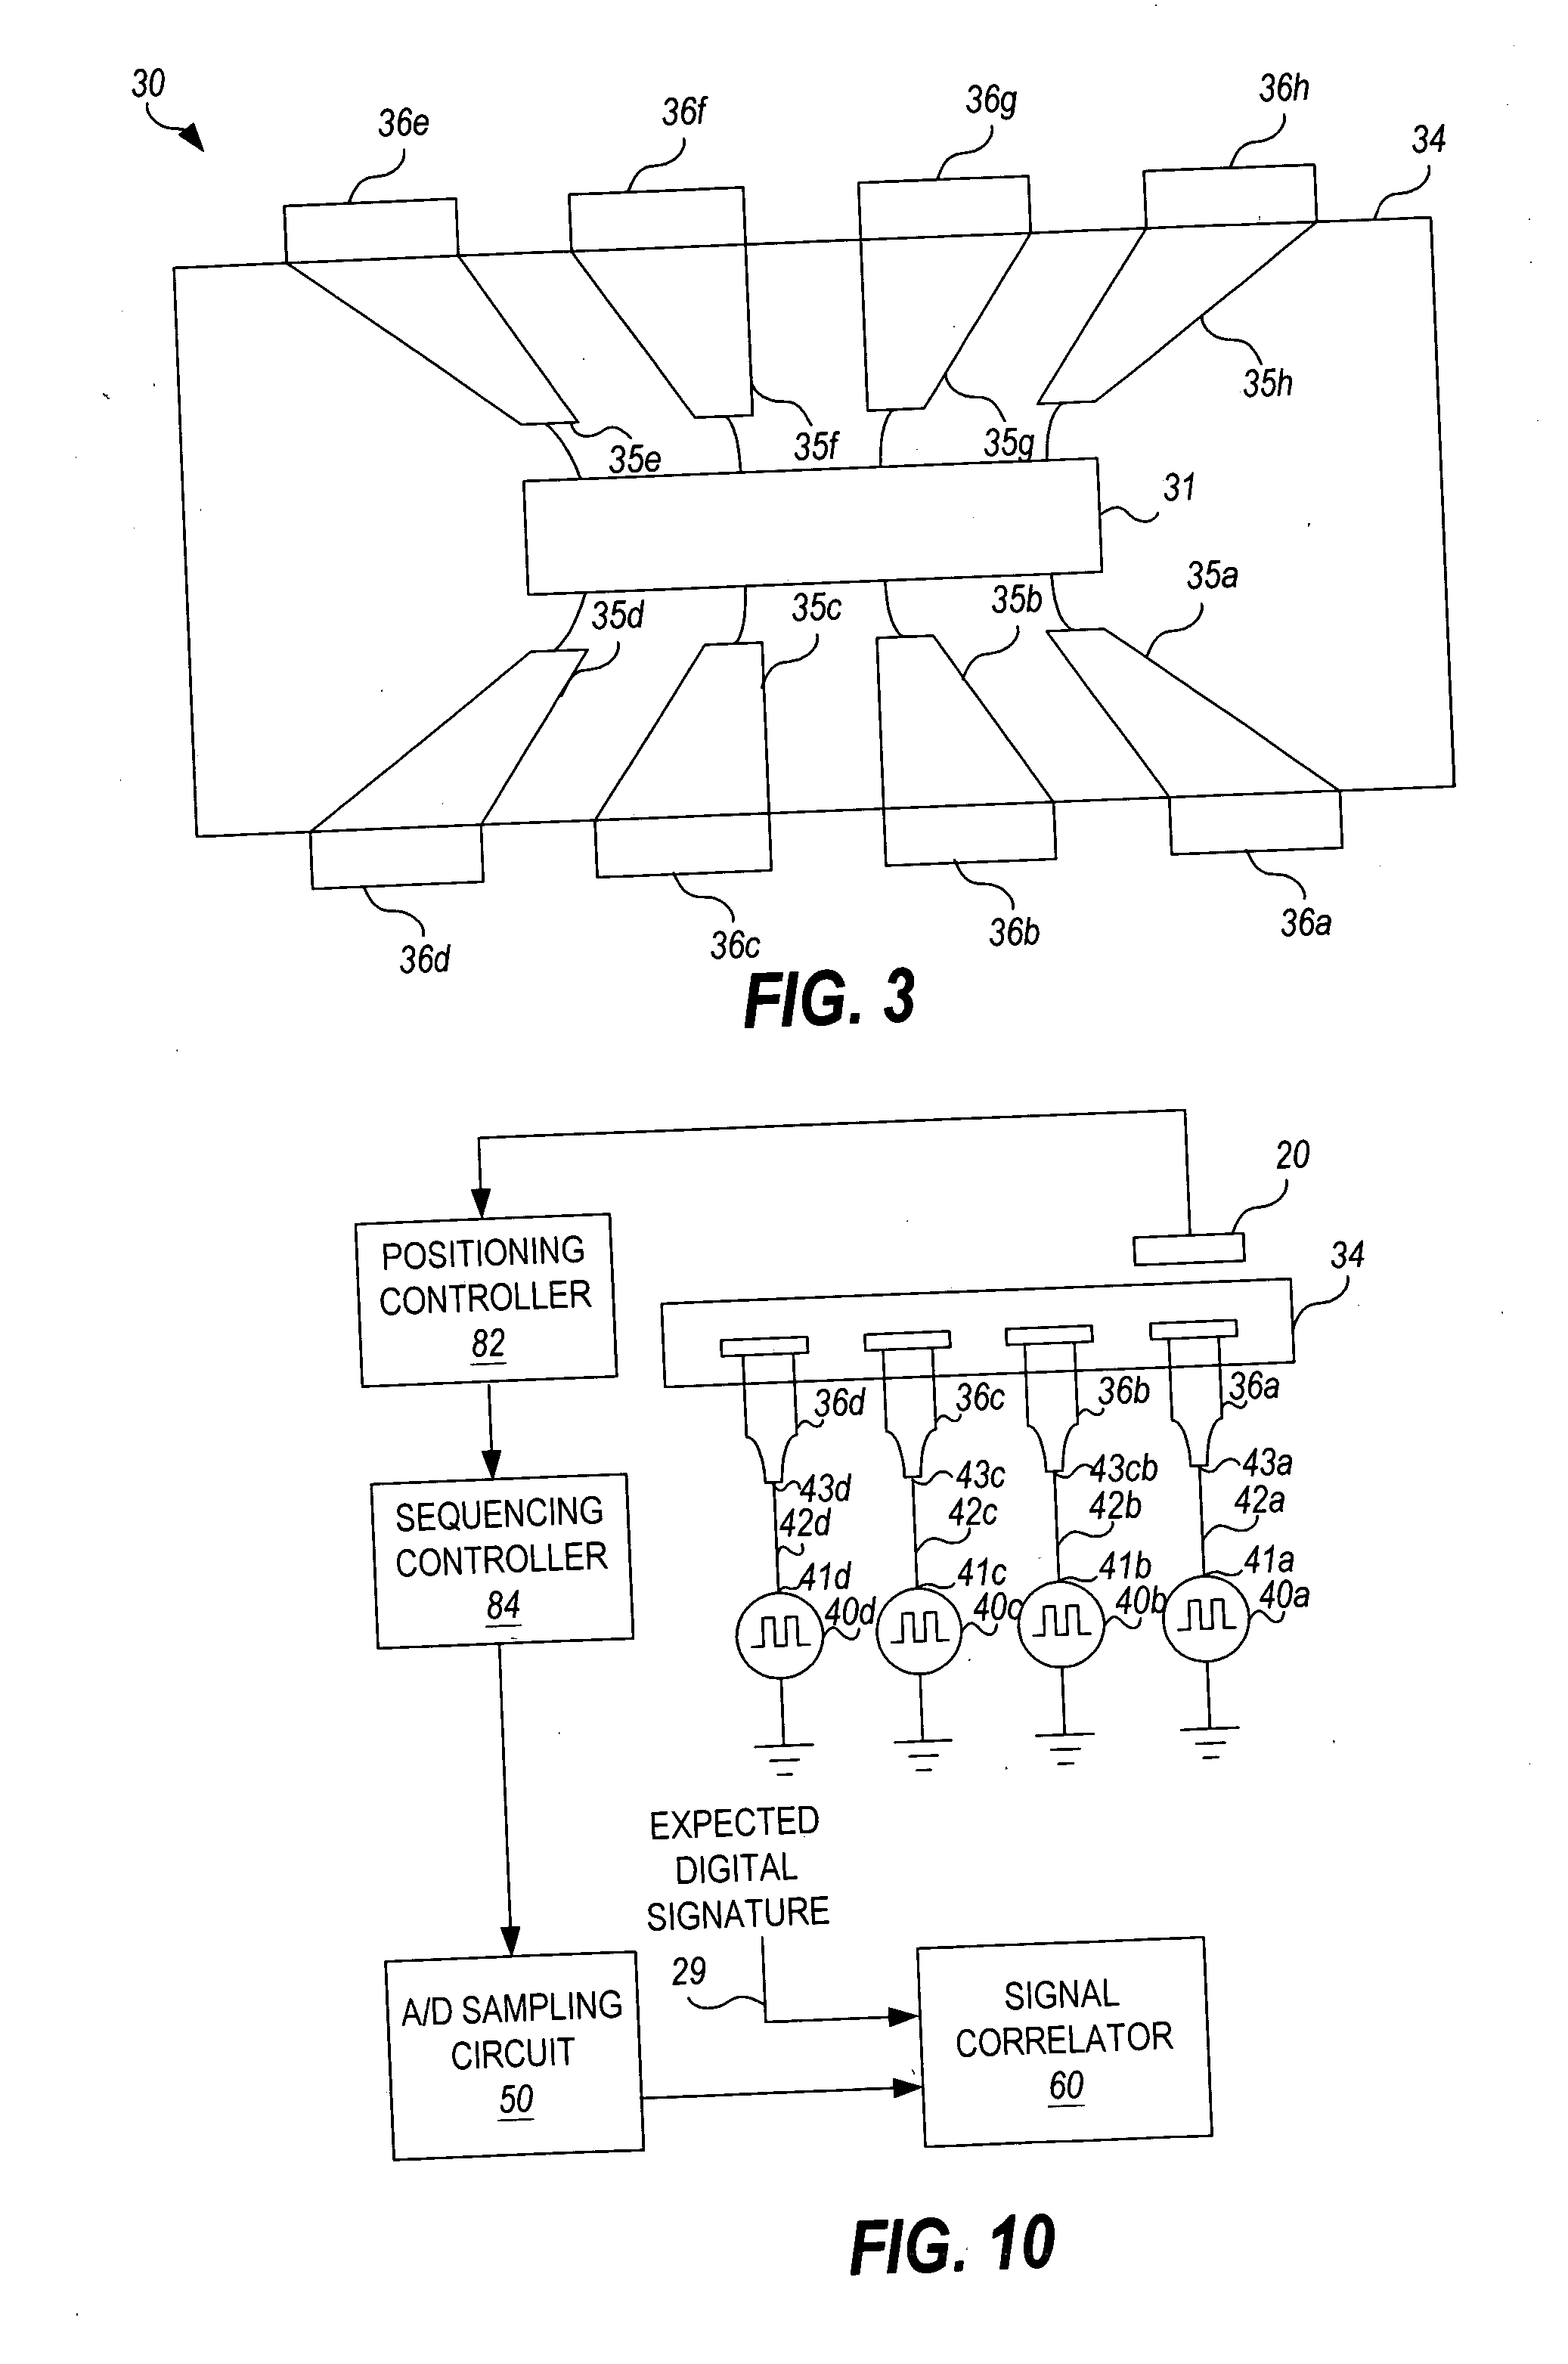 Capacitive sensor measurement method for discrete time sampled system for in-circuit test